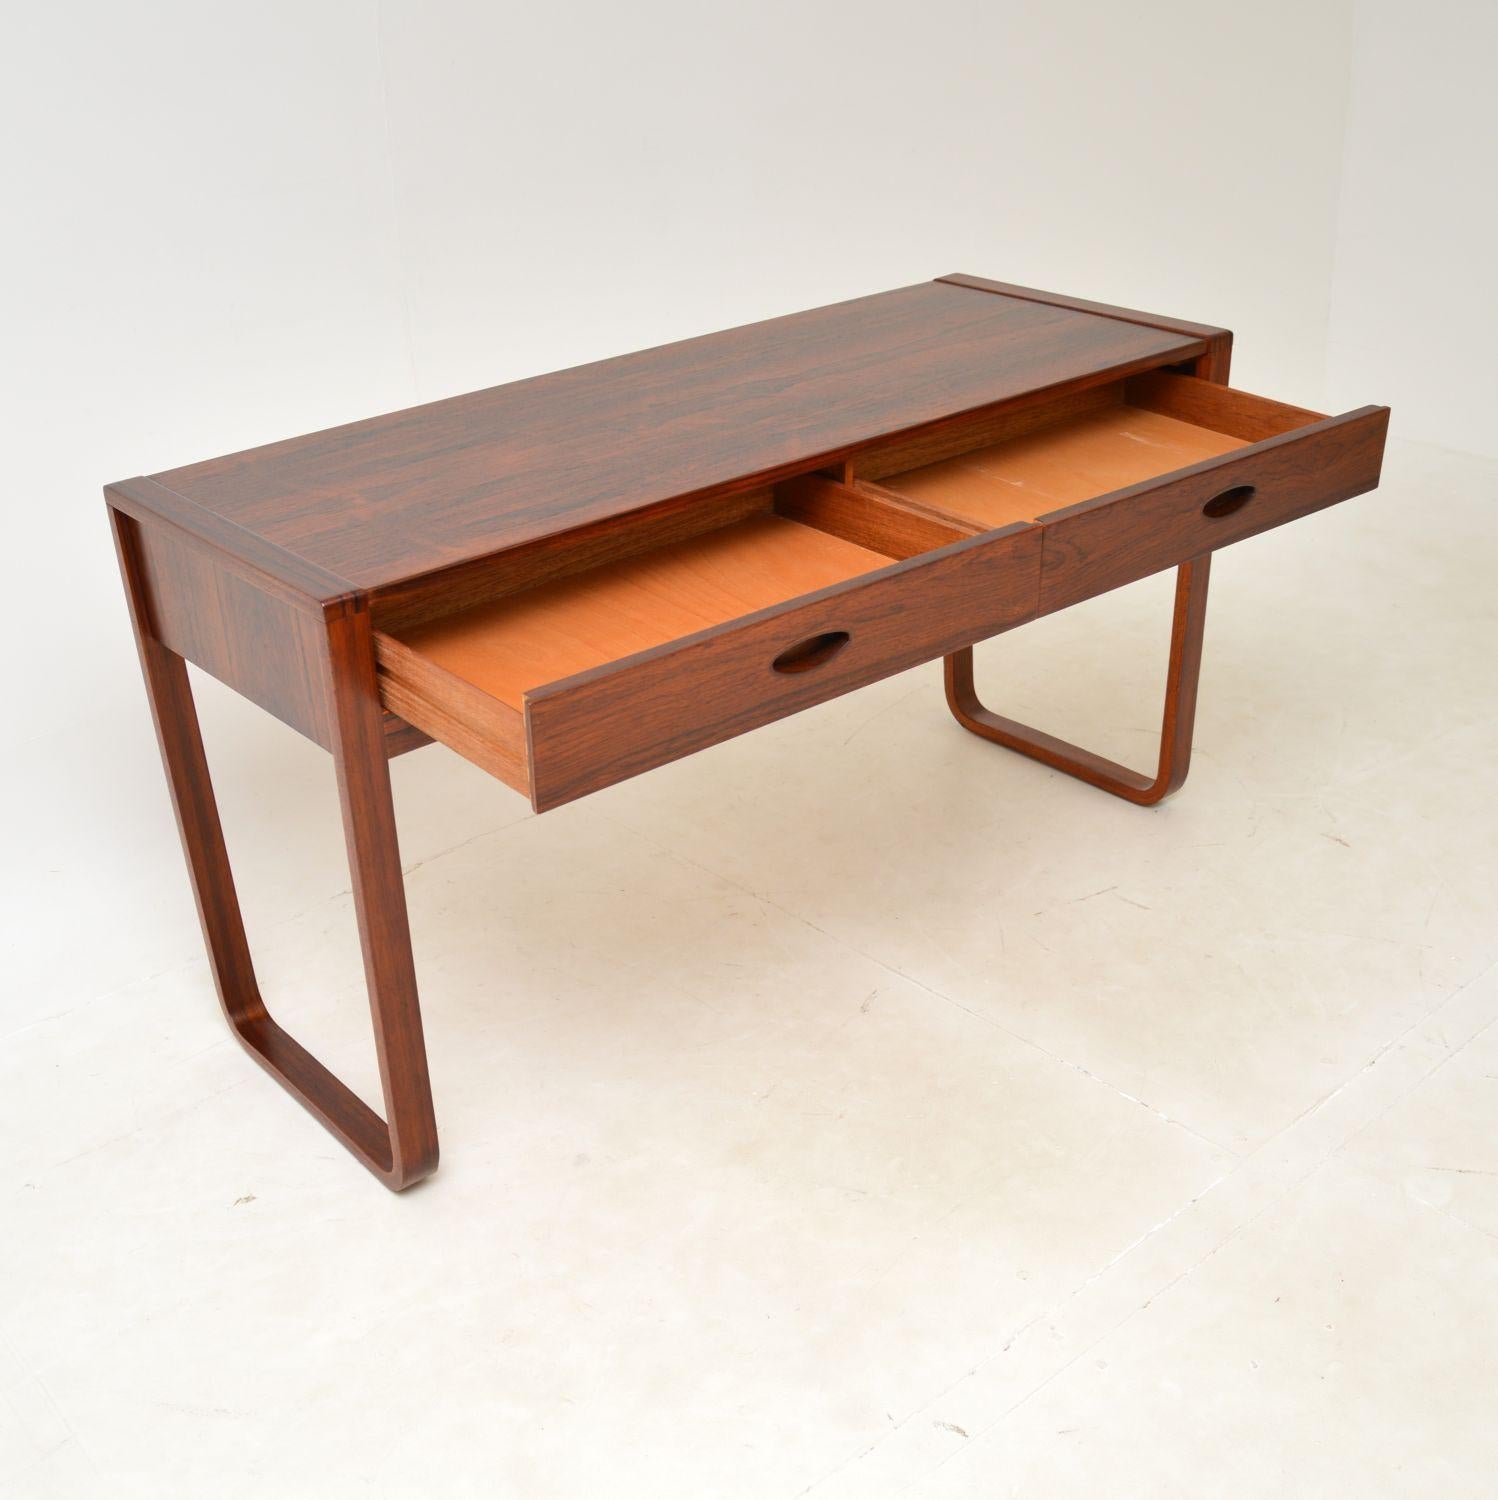 A stylish and very rare vintage console table / desk by Uniflex. This was designed by Gunther Hoffstead for Uniflex, it was made in England and dates from the 1960’s.

It is of superb quality with a gorgeous design. There are two drawers with